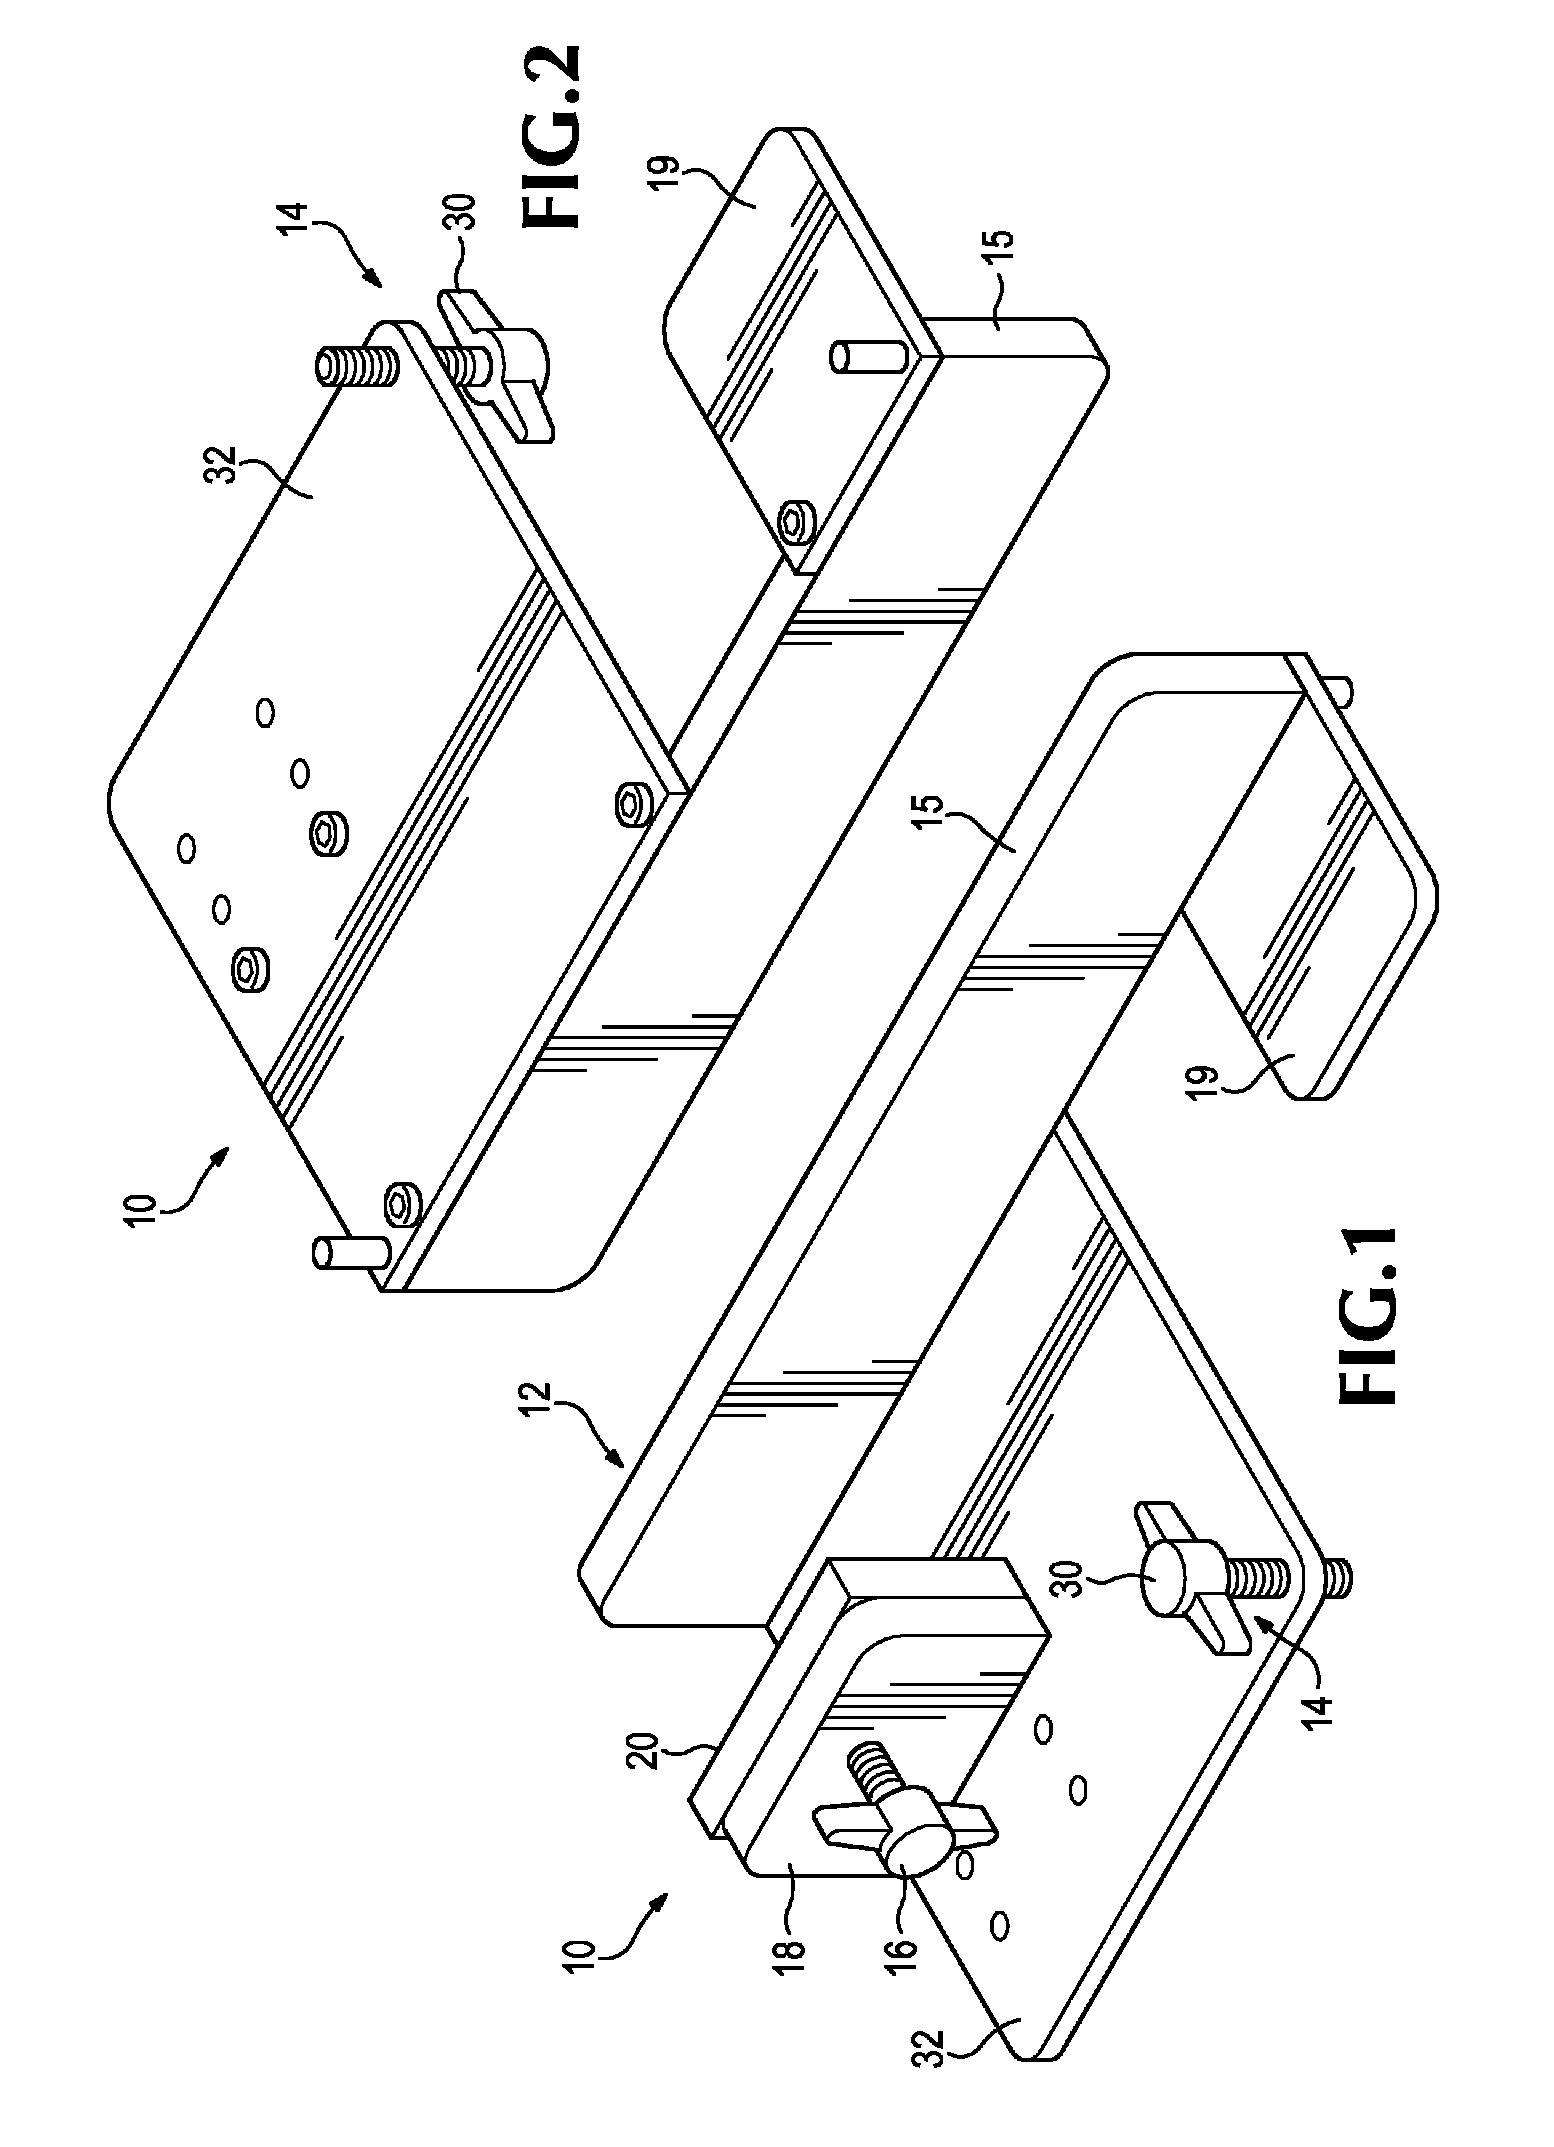 Rifle scope installation fixture and method of use